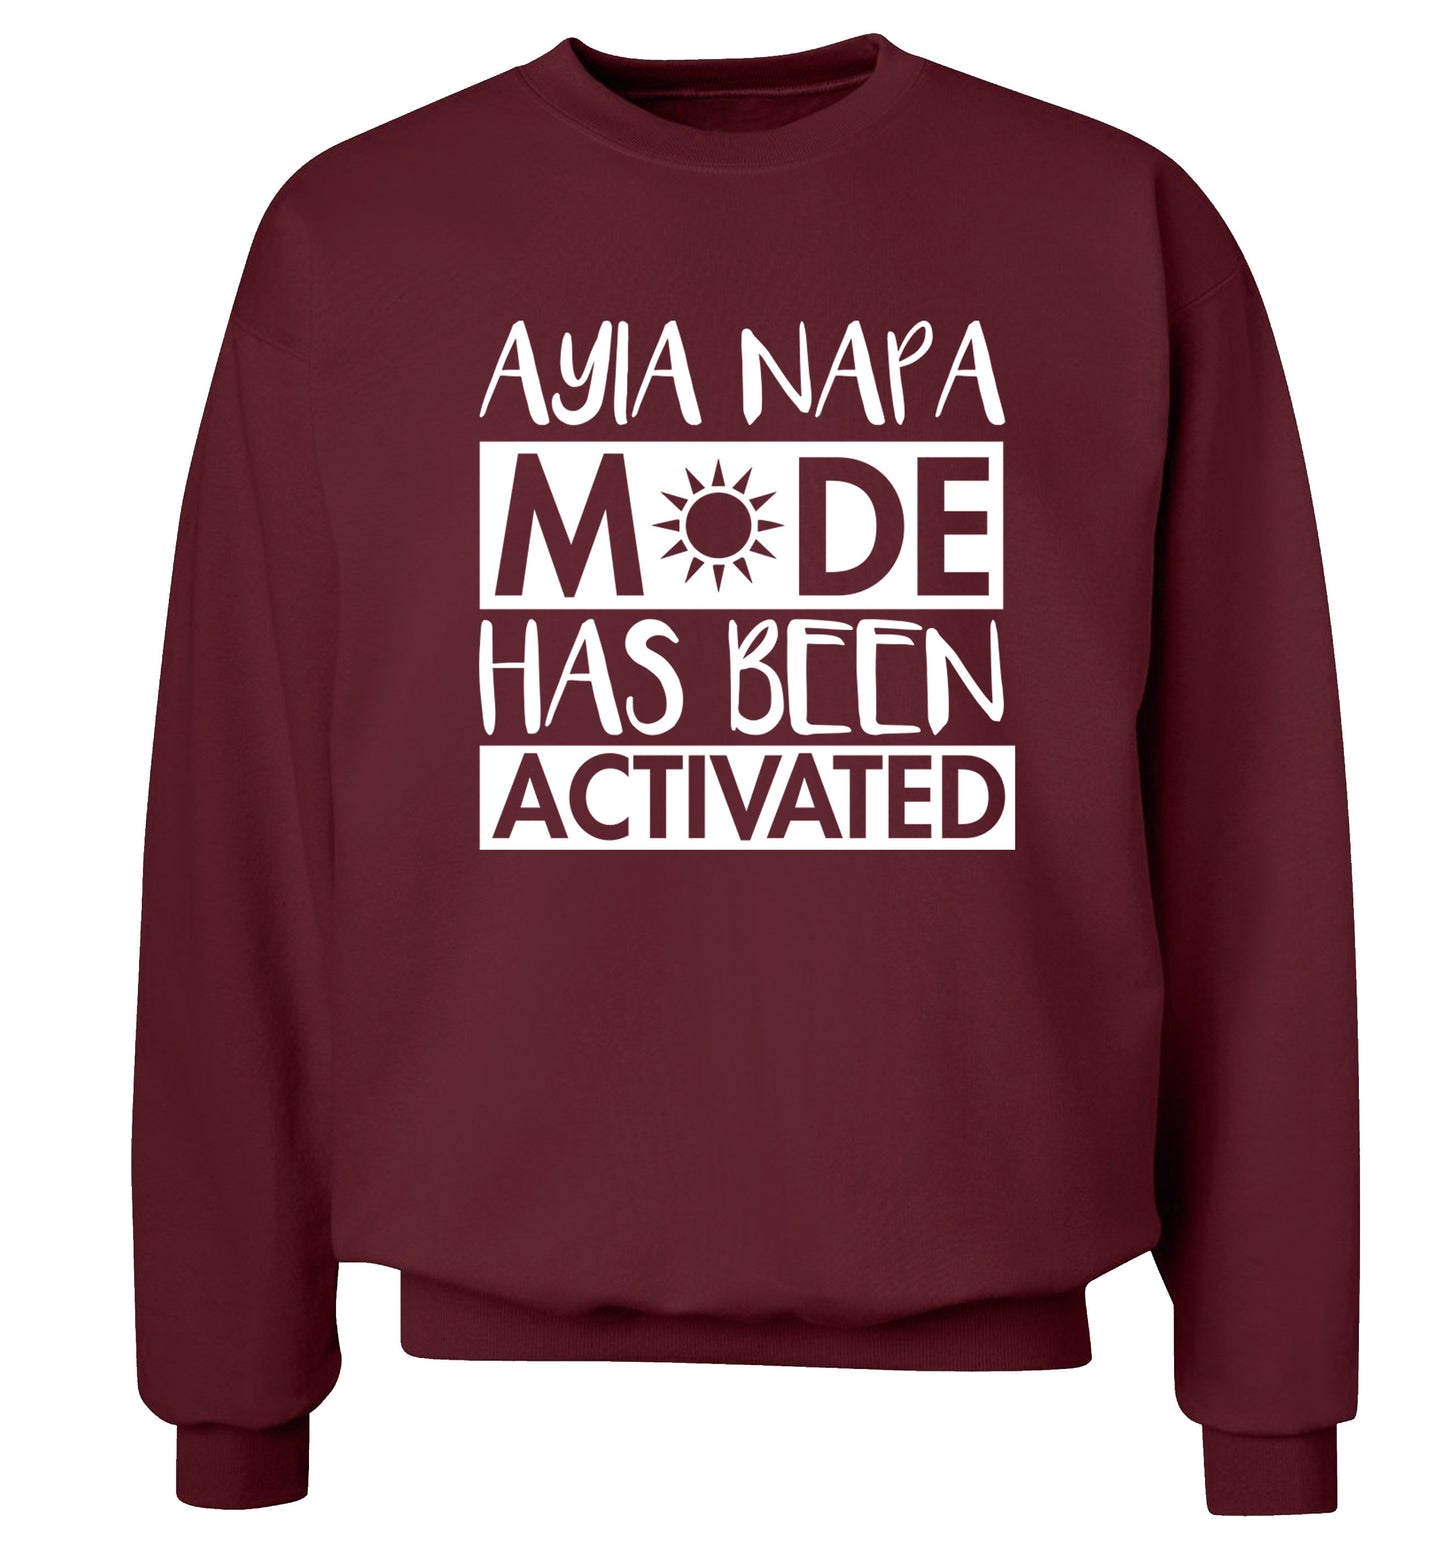 Aiya Napa mode has been activated Adult's unisex maroon Sweater 2XL